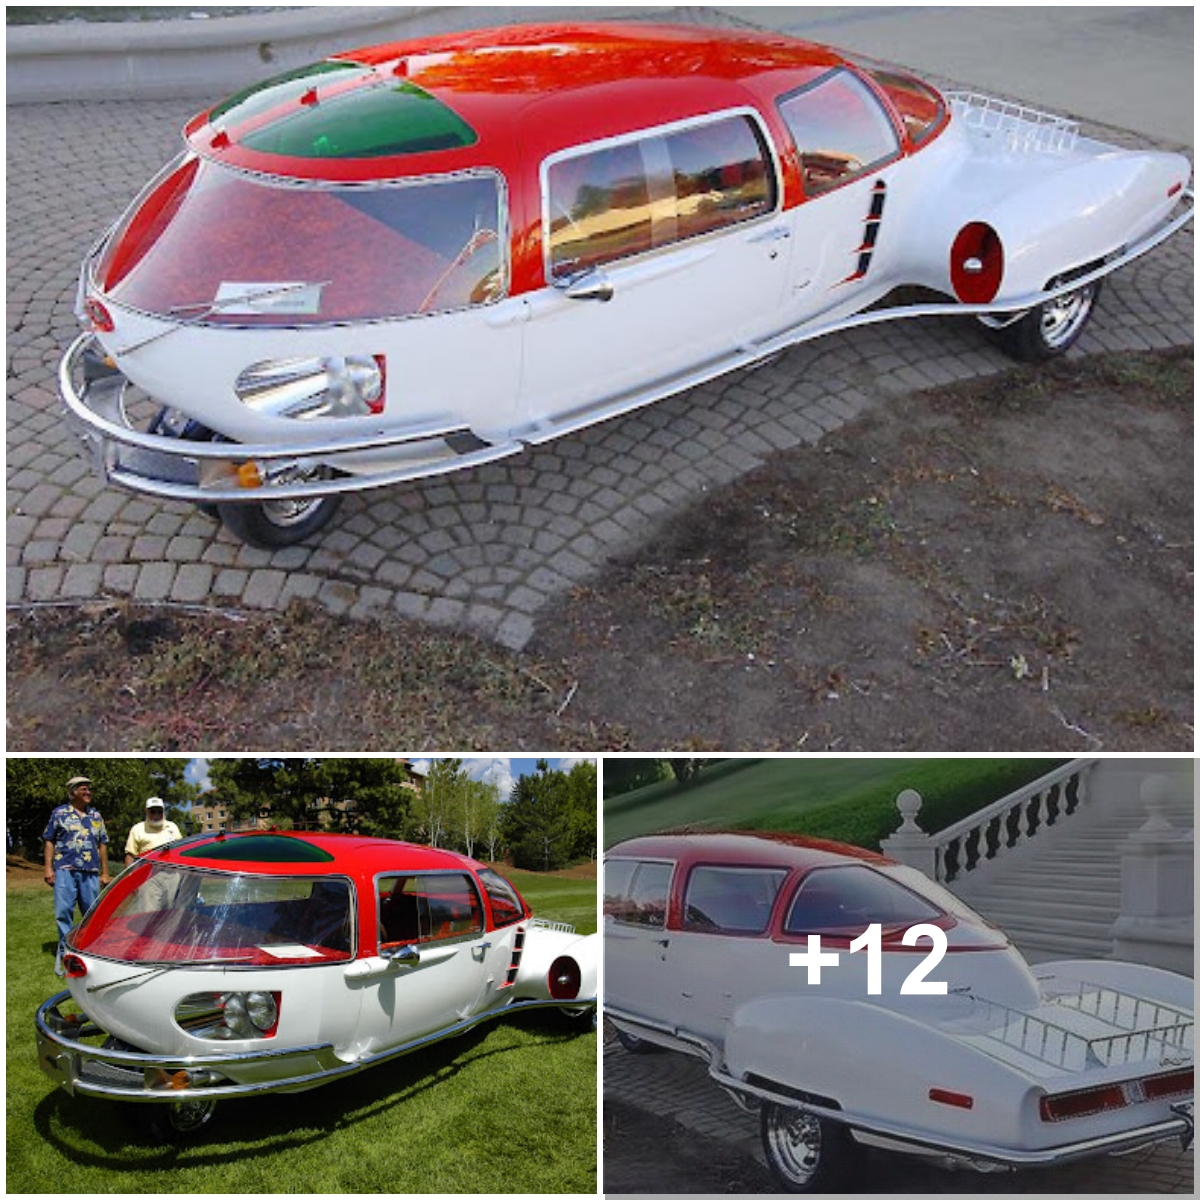 1974 Fascination was created by Paul M. Lewis as a Space Age Transportation Innovation